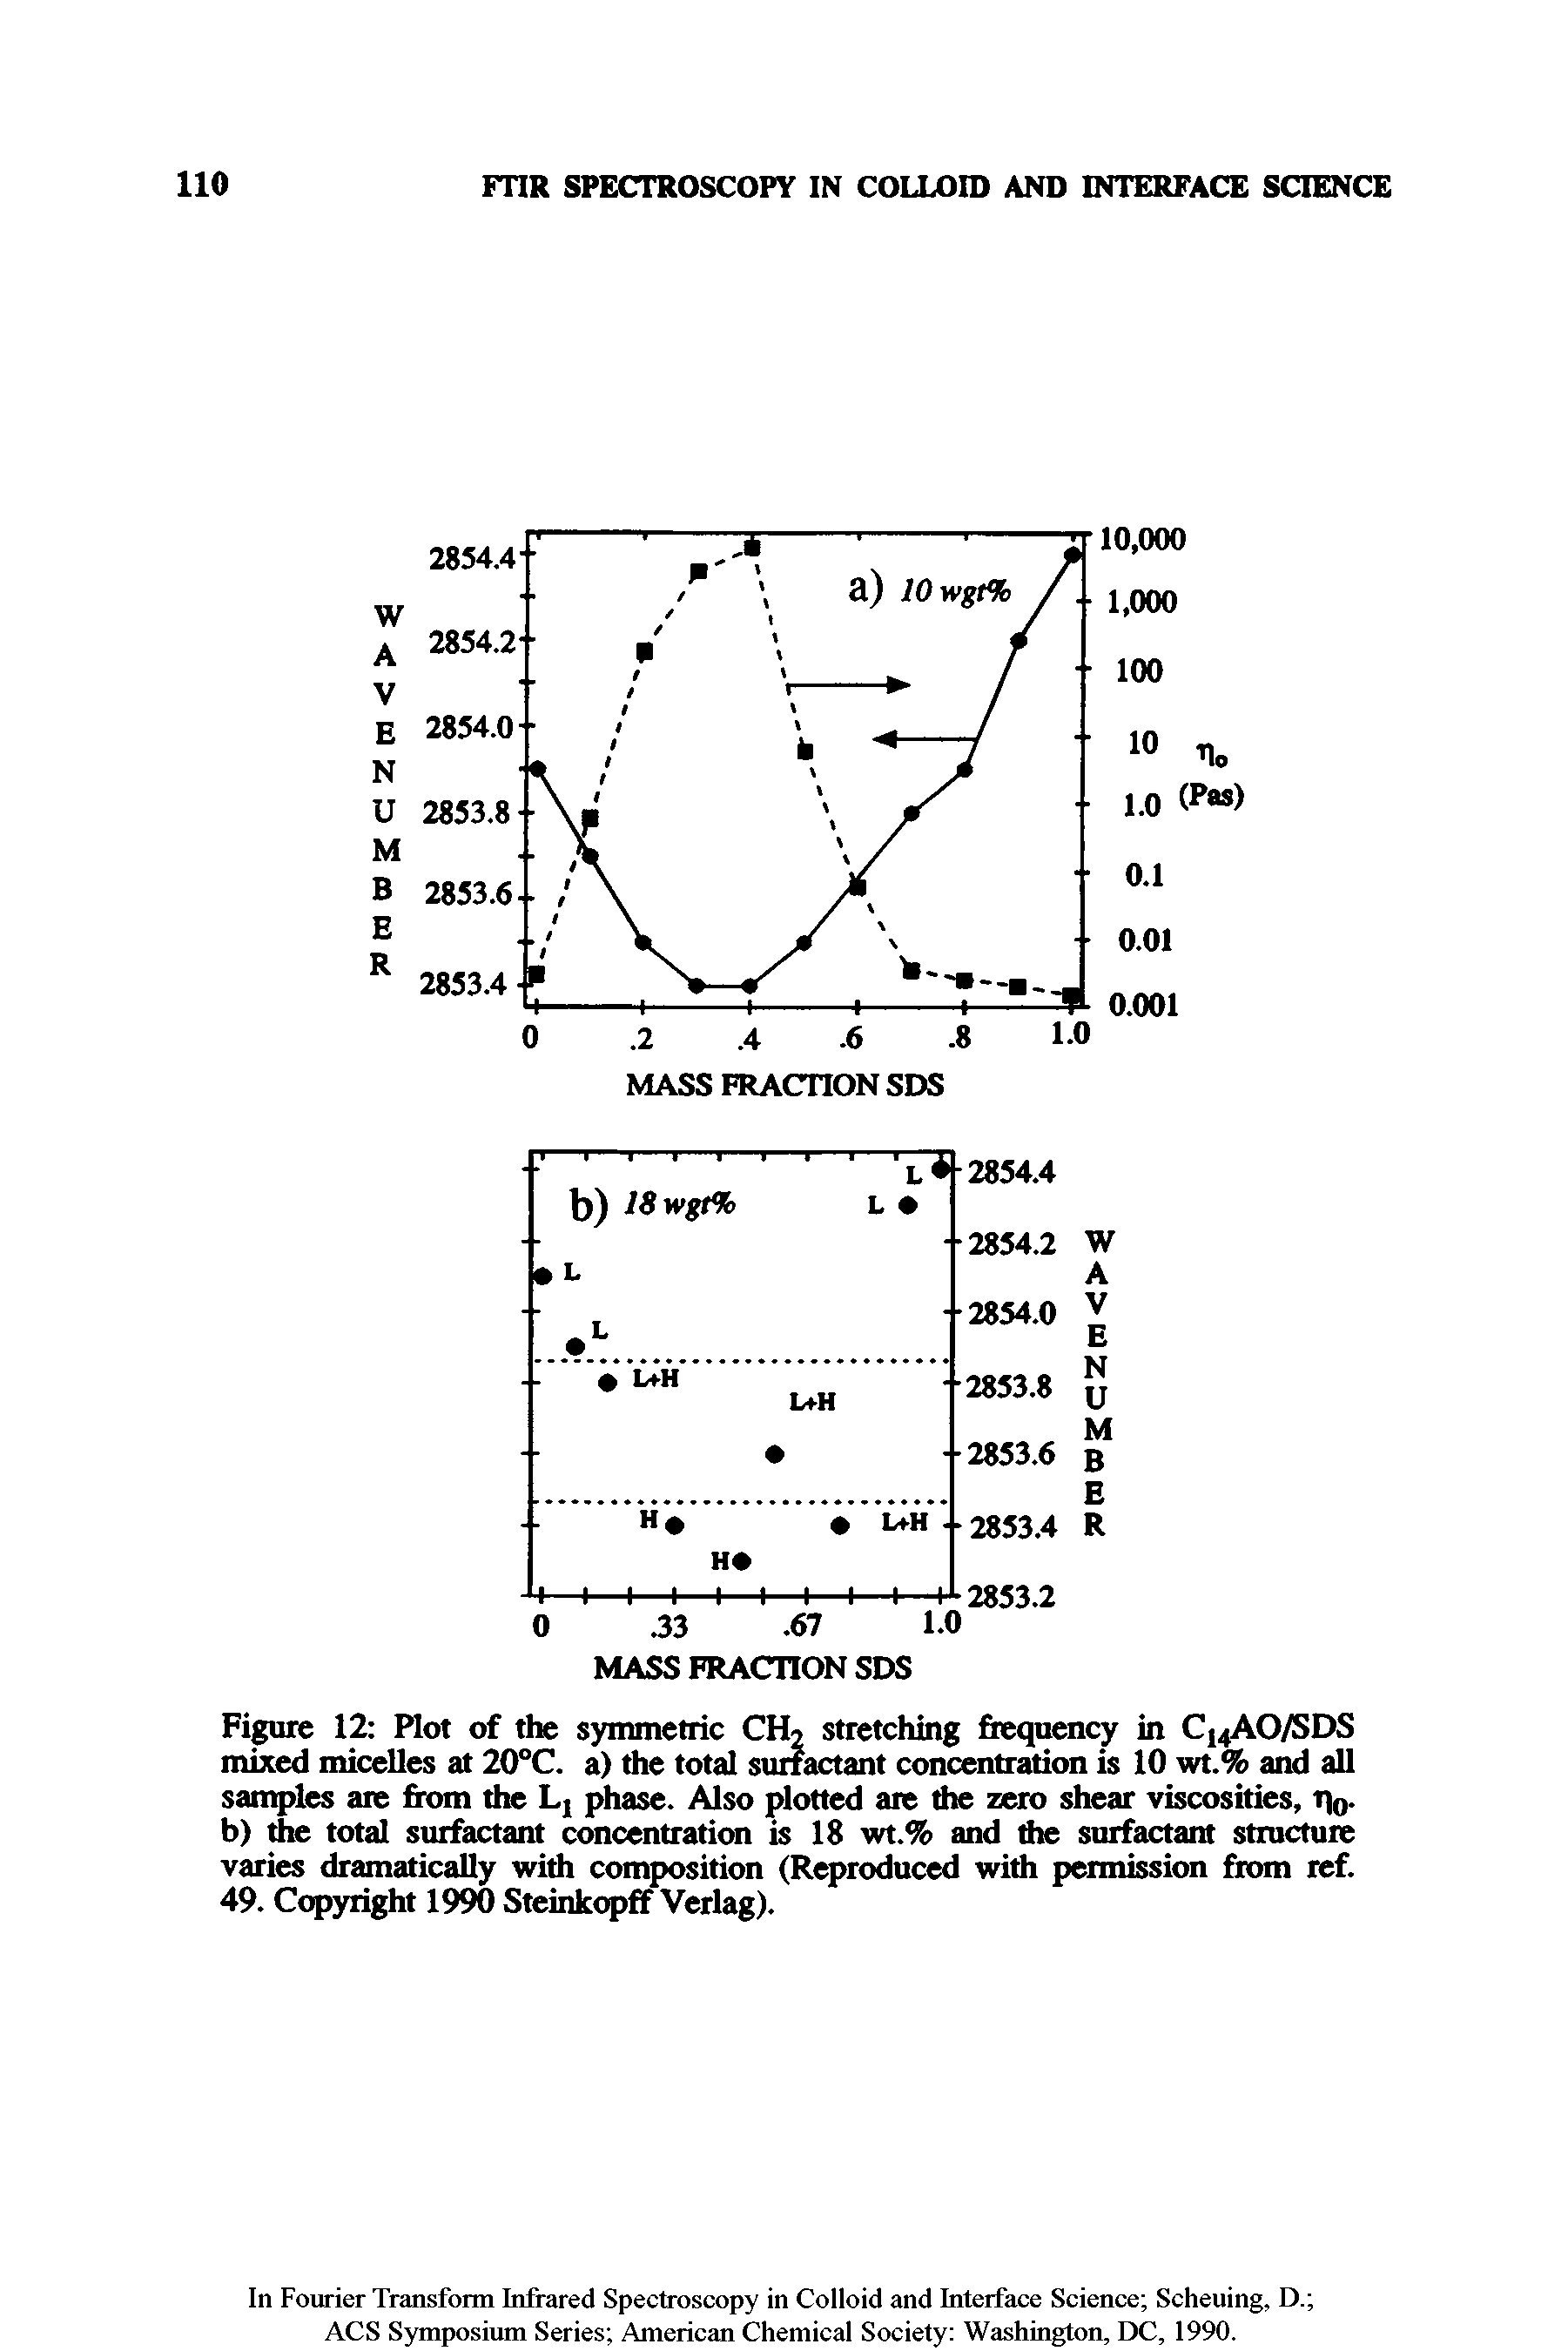 Figure 12 Plot of the symmetric CH stretching frequency in C14AO/SDS mixed micelles at 20°C. a) the total surfactant concentration is 10 wt.% and all samples are from the Lt phase. Also plotted are the zero shear viscosities, q0. b) die total surfactant concentration is 18 wt.% and the surfactant structure varies dramatically with composition (Reproduced with permission from ref. 49. Copyright 1990 Steinkopff Verlag).